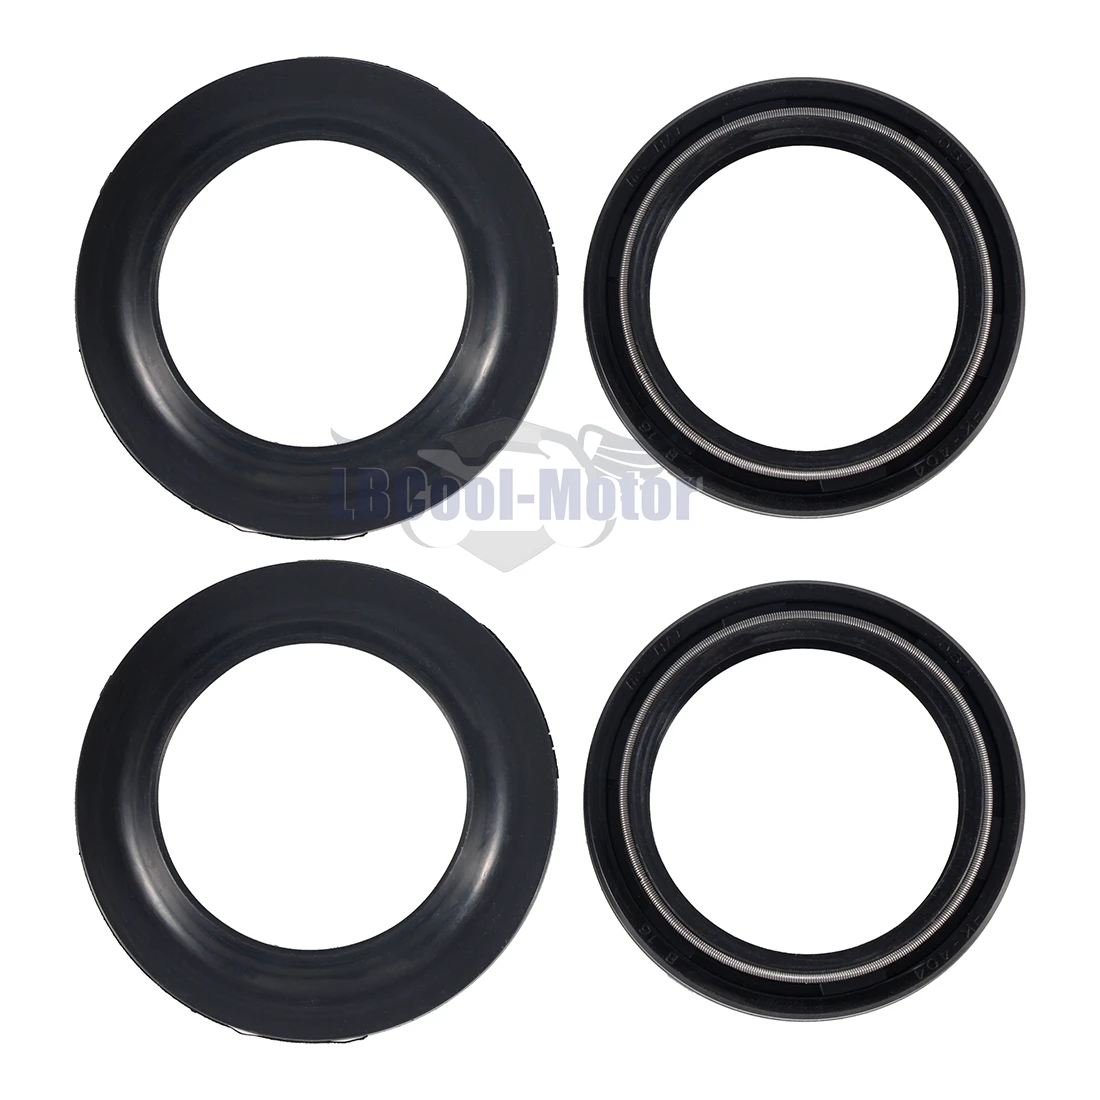 

Motorcycle Front Fork Oil Dust Seal Wiper Seals Kit Set For Kawasaki ZZR250 1990-2007 1991 92 93 94 95 96 97 98 99 2000 01 2006